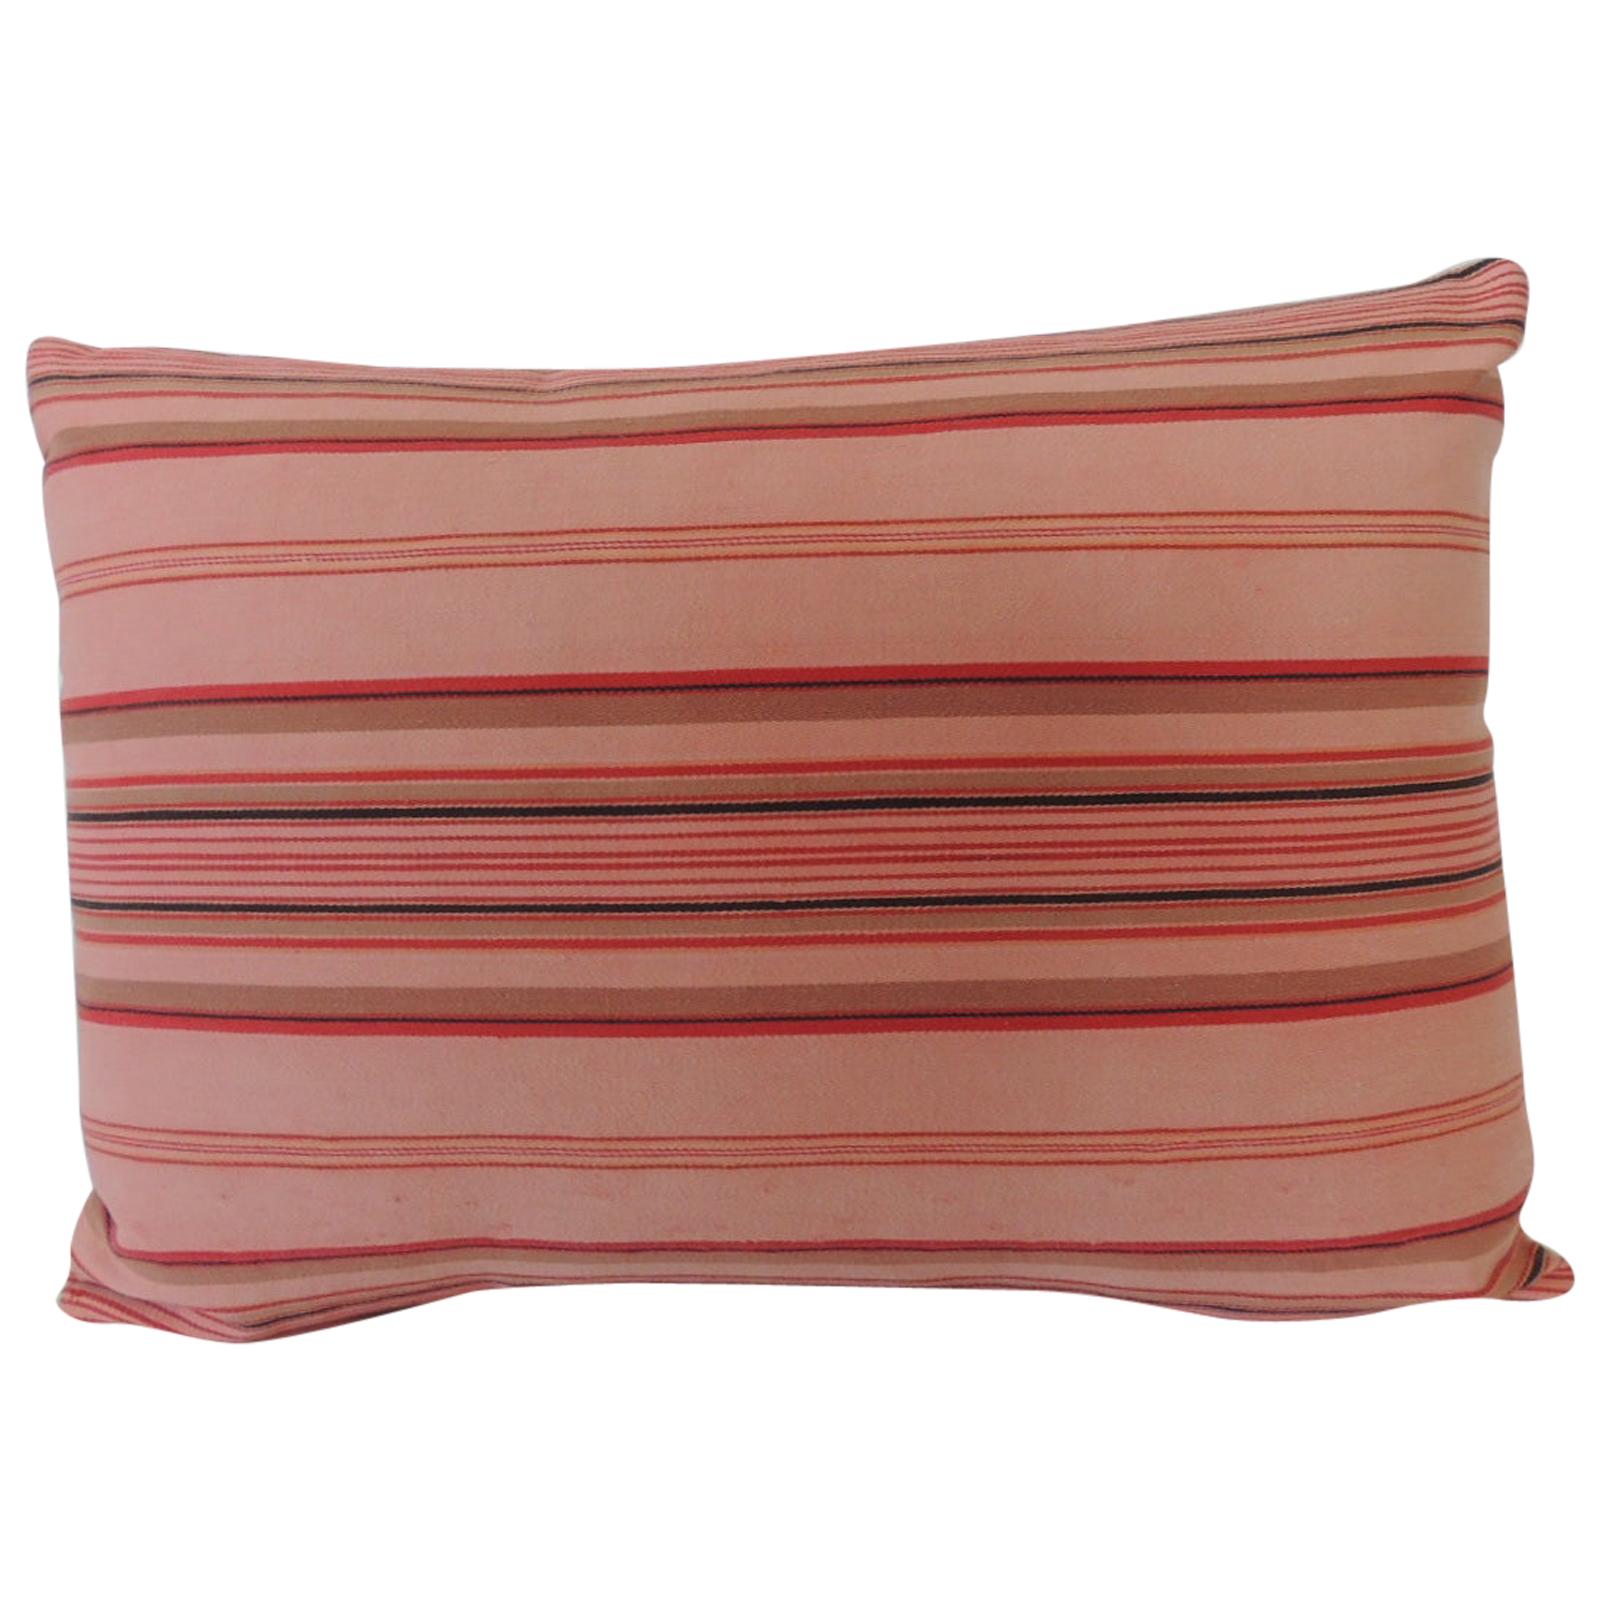 Vintage French Pink and Red Stripes Lumbar Decorative Pillow